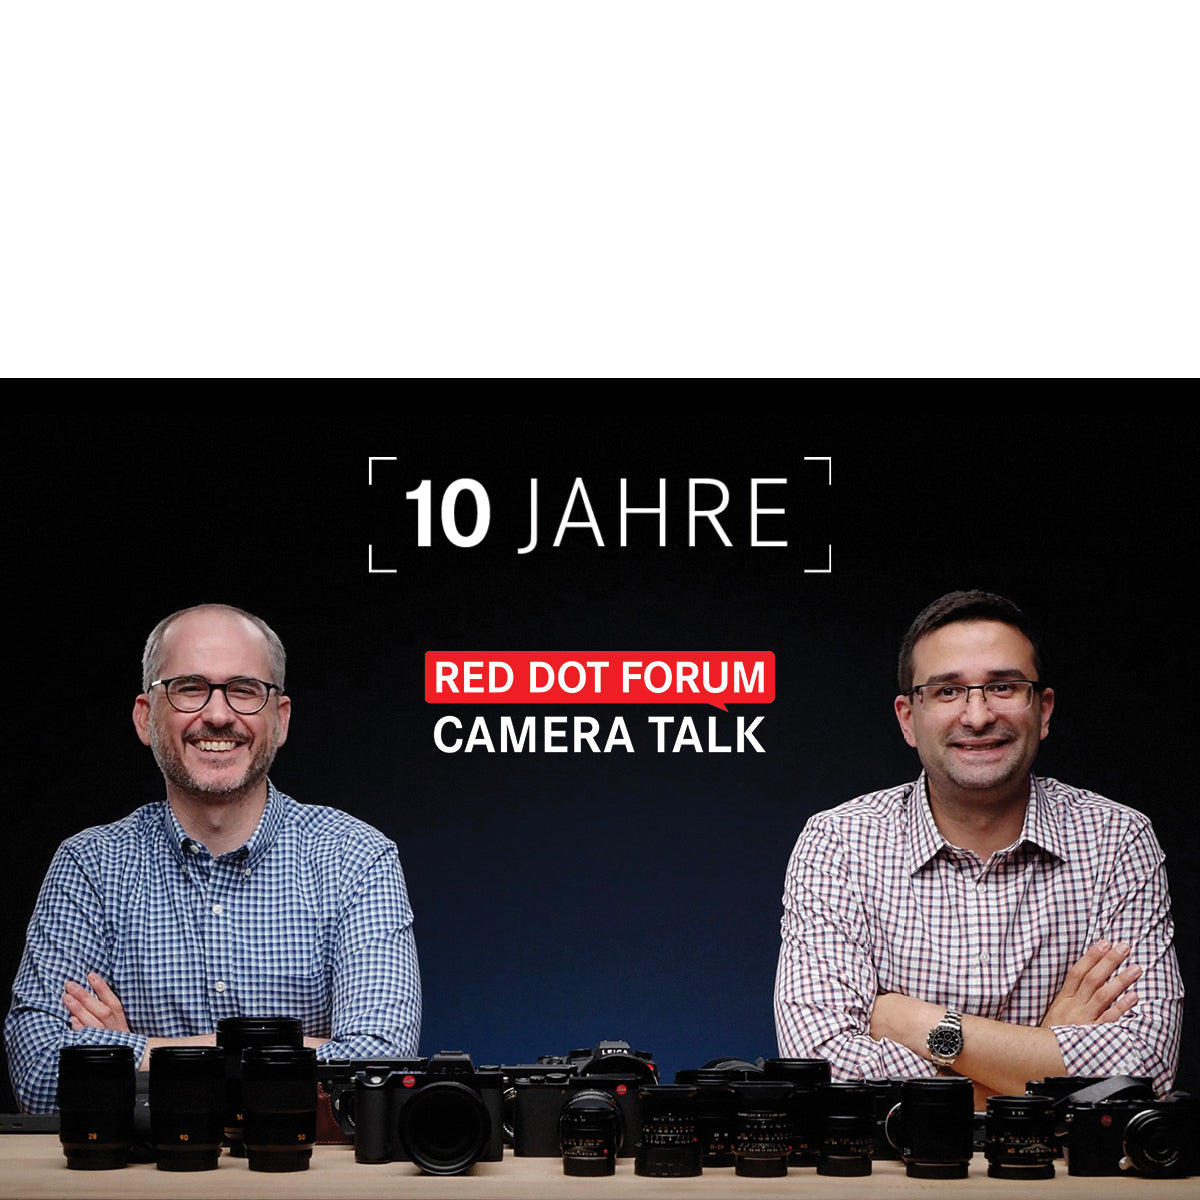 10 JAHRE: RED DOT FORUM CAMERA TALK LIVE (IN PERSON!) & FAREWELL BRUNCH | Sunday, March 5, 2023, 10:00am - 12 Noon